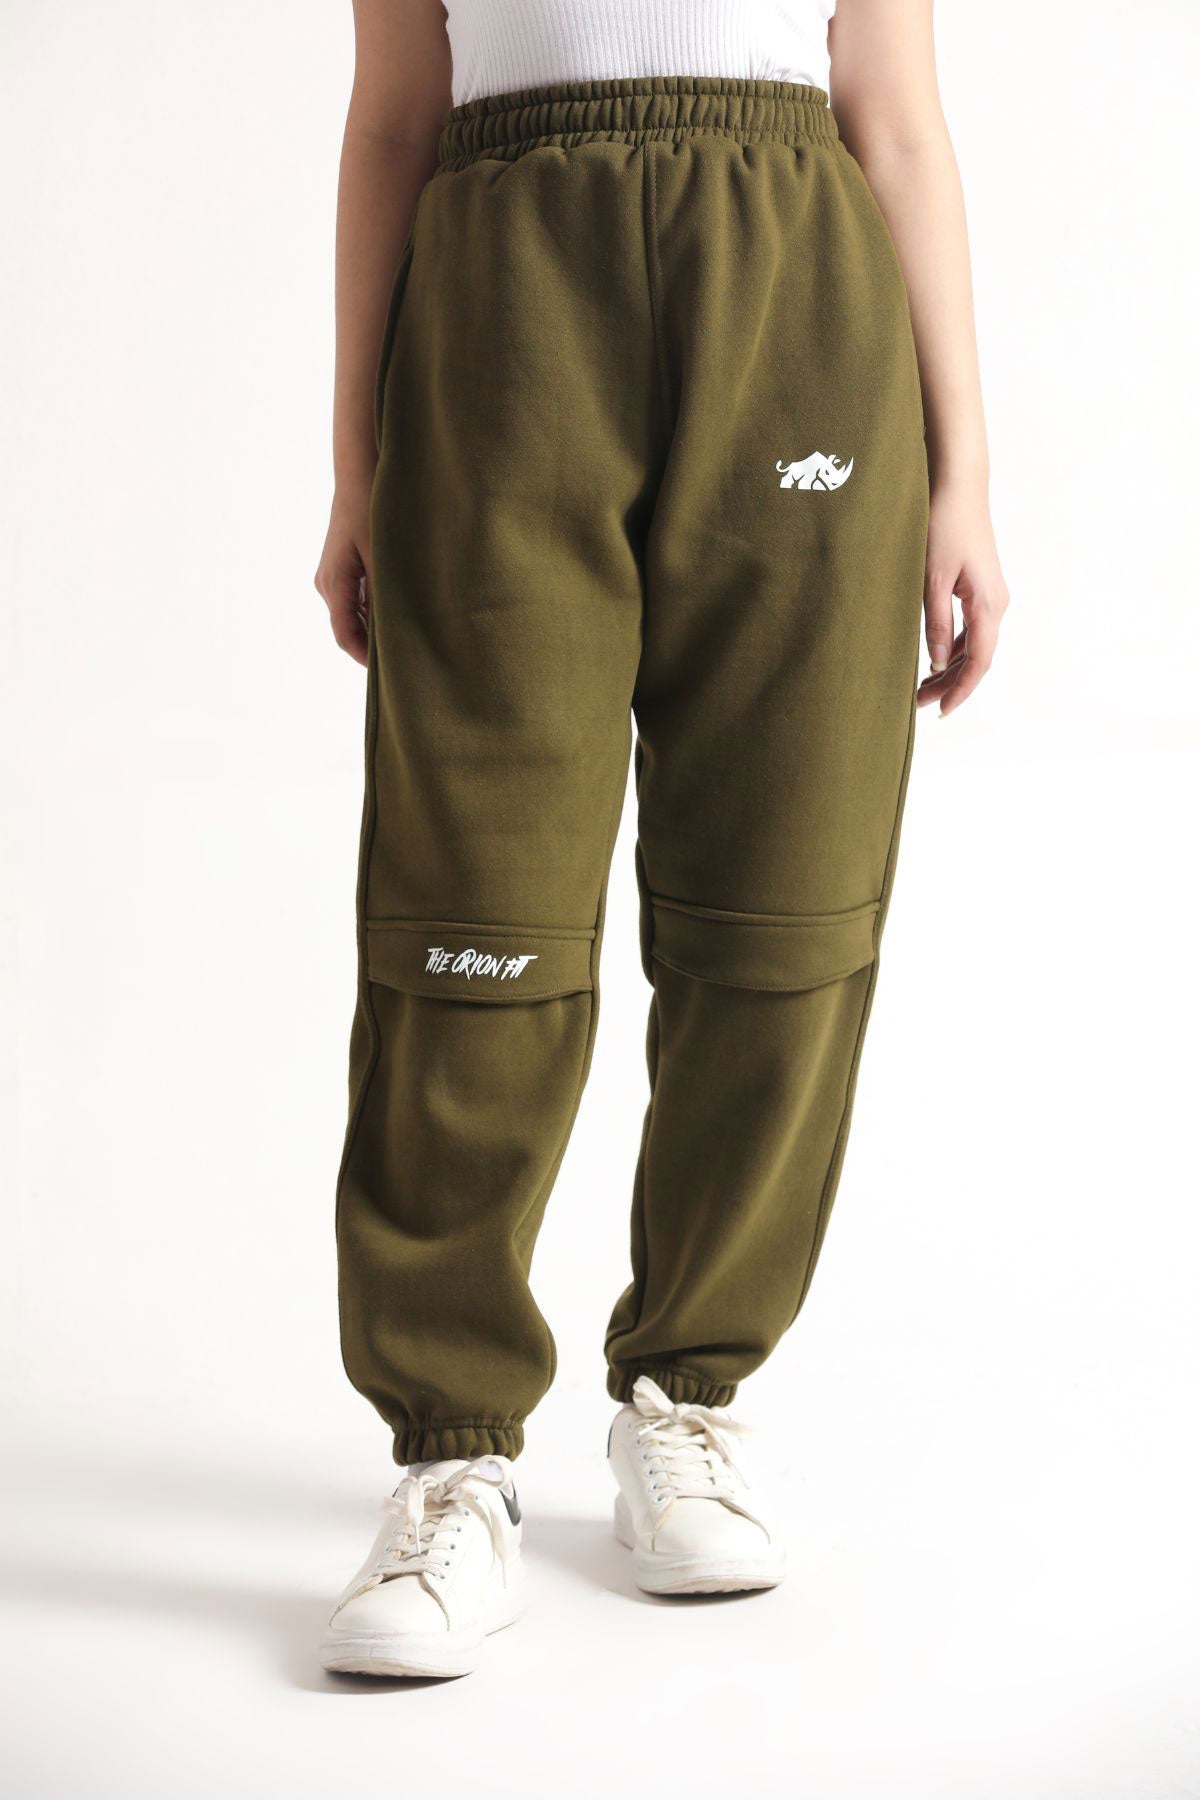 SCULPT ULTRA COMFORT CARGO TROUSERS- OLIVE GREEN - The Orion Fit